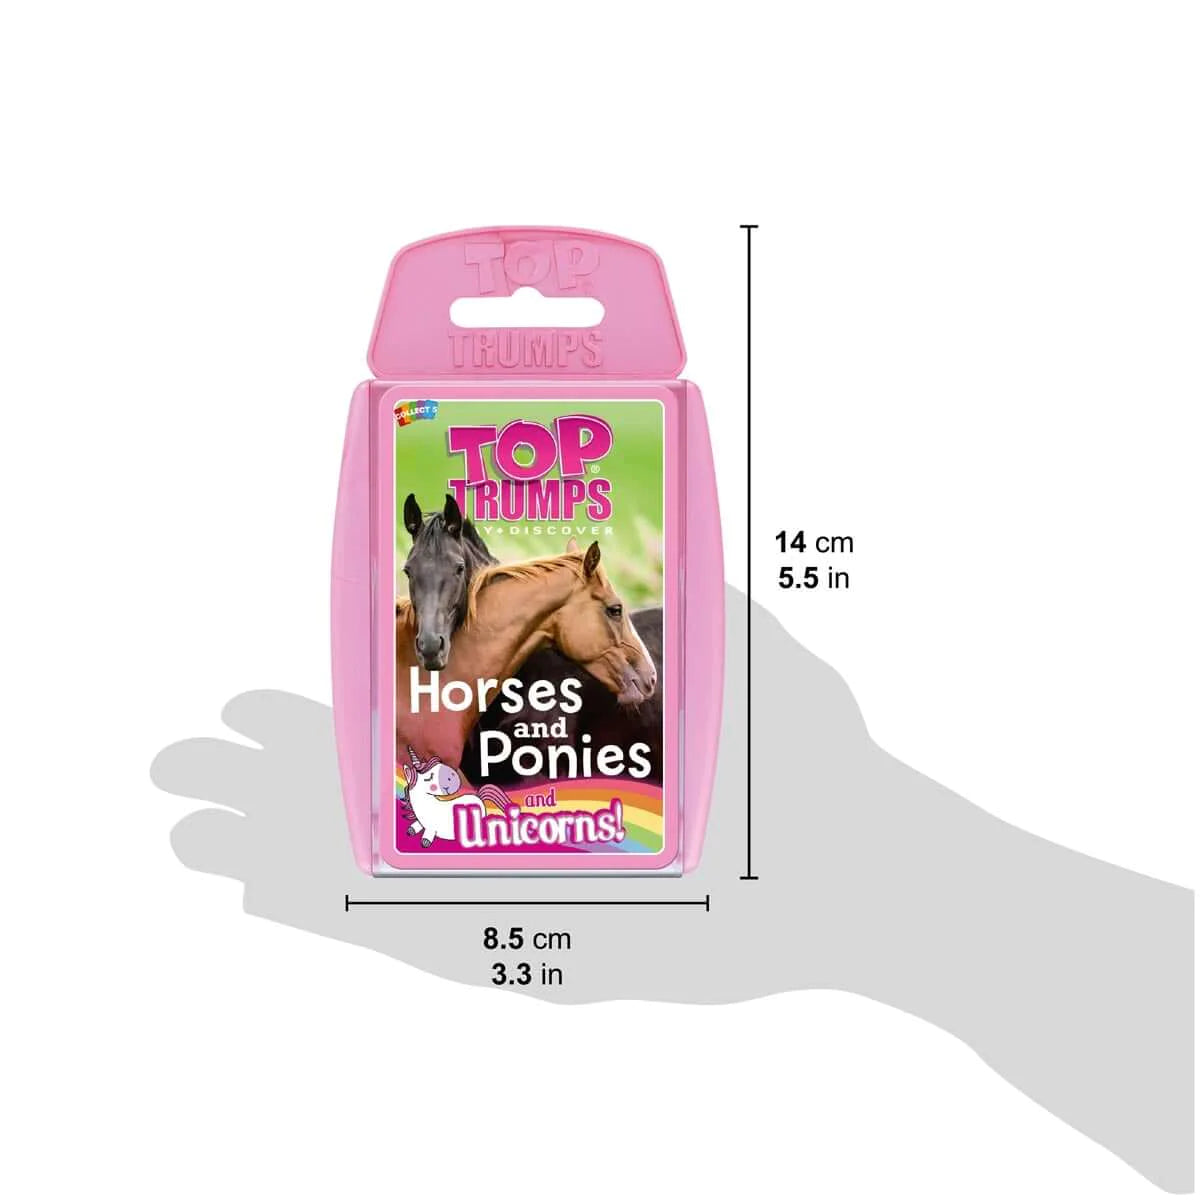 Horses, Ponies and Unicorns Top Trumps Card Game